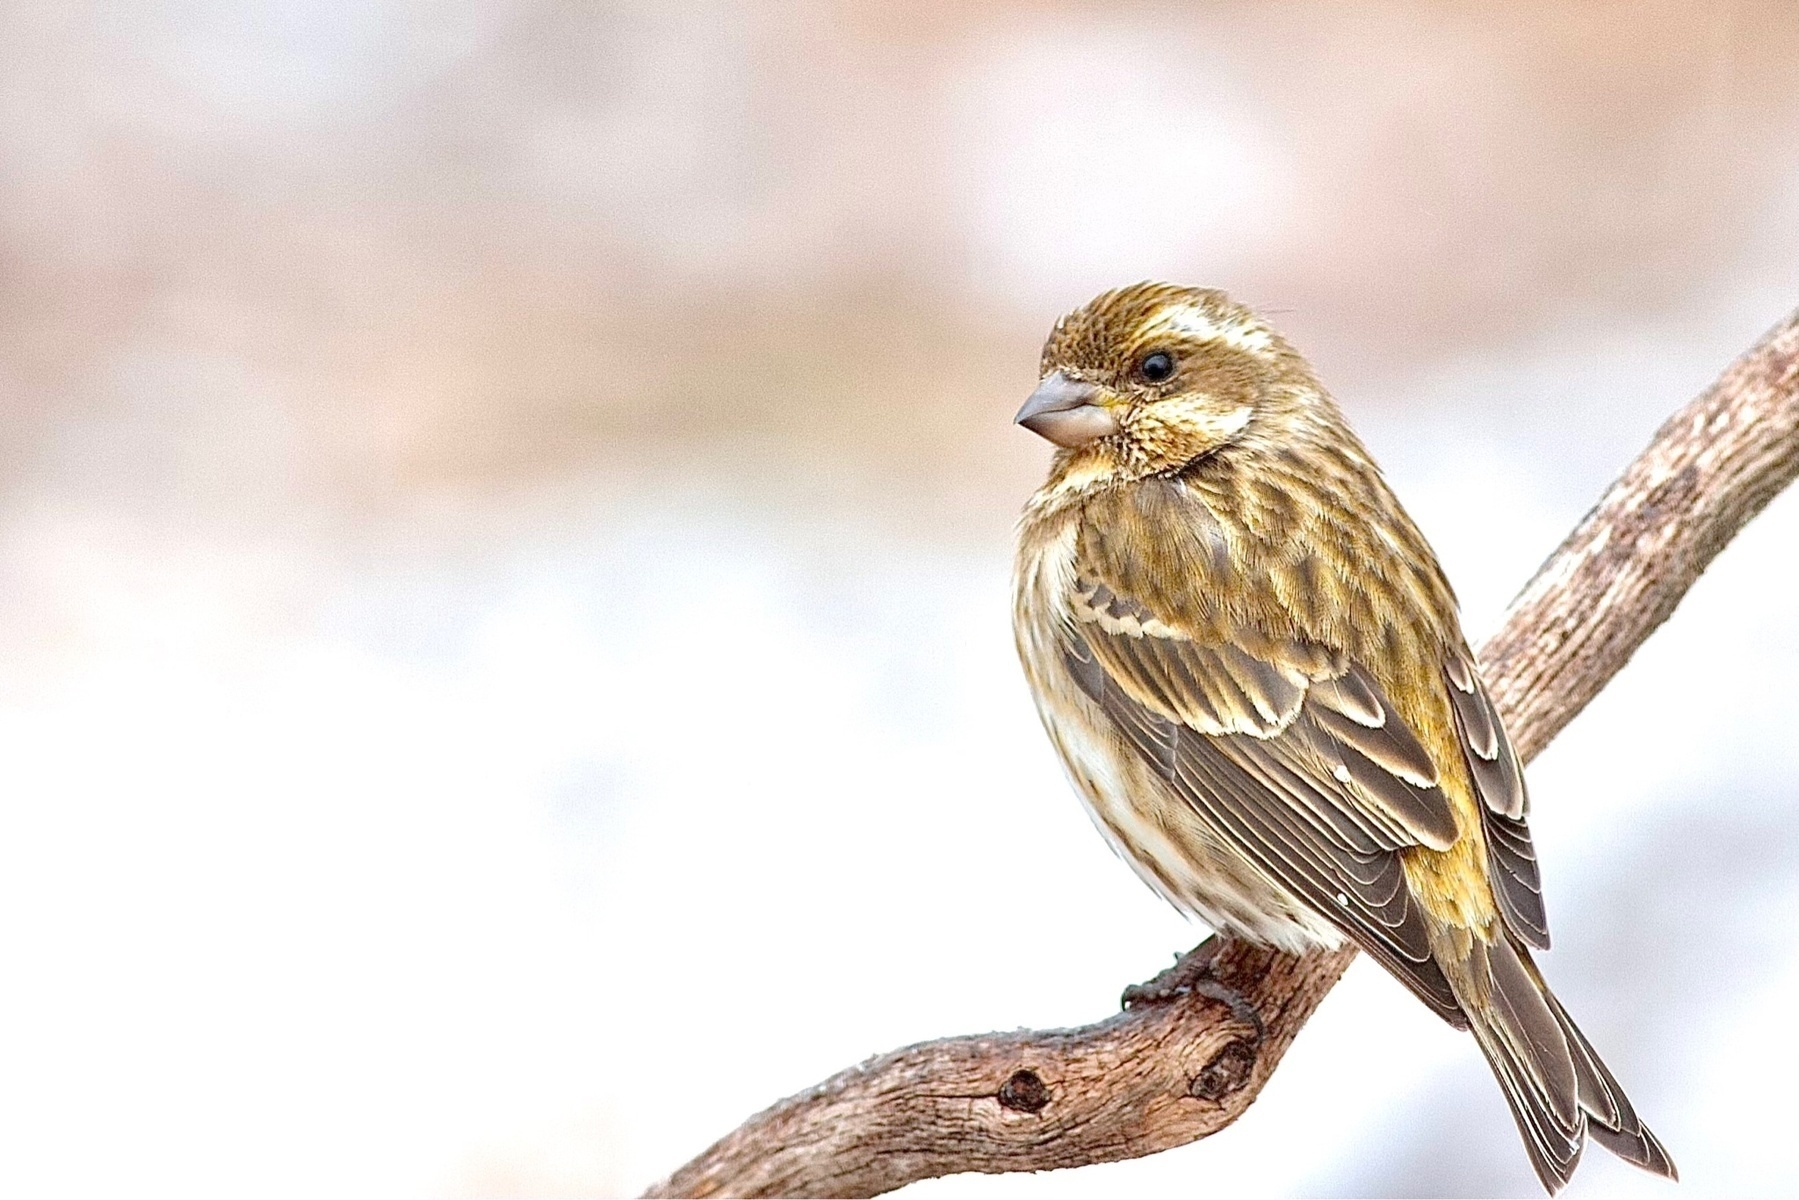 A small tannish yellow and white colored bird is perched on a branch set against blurred winter background 